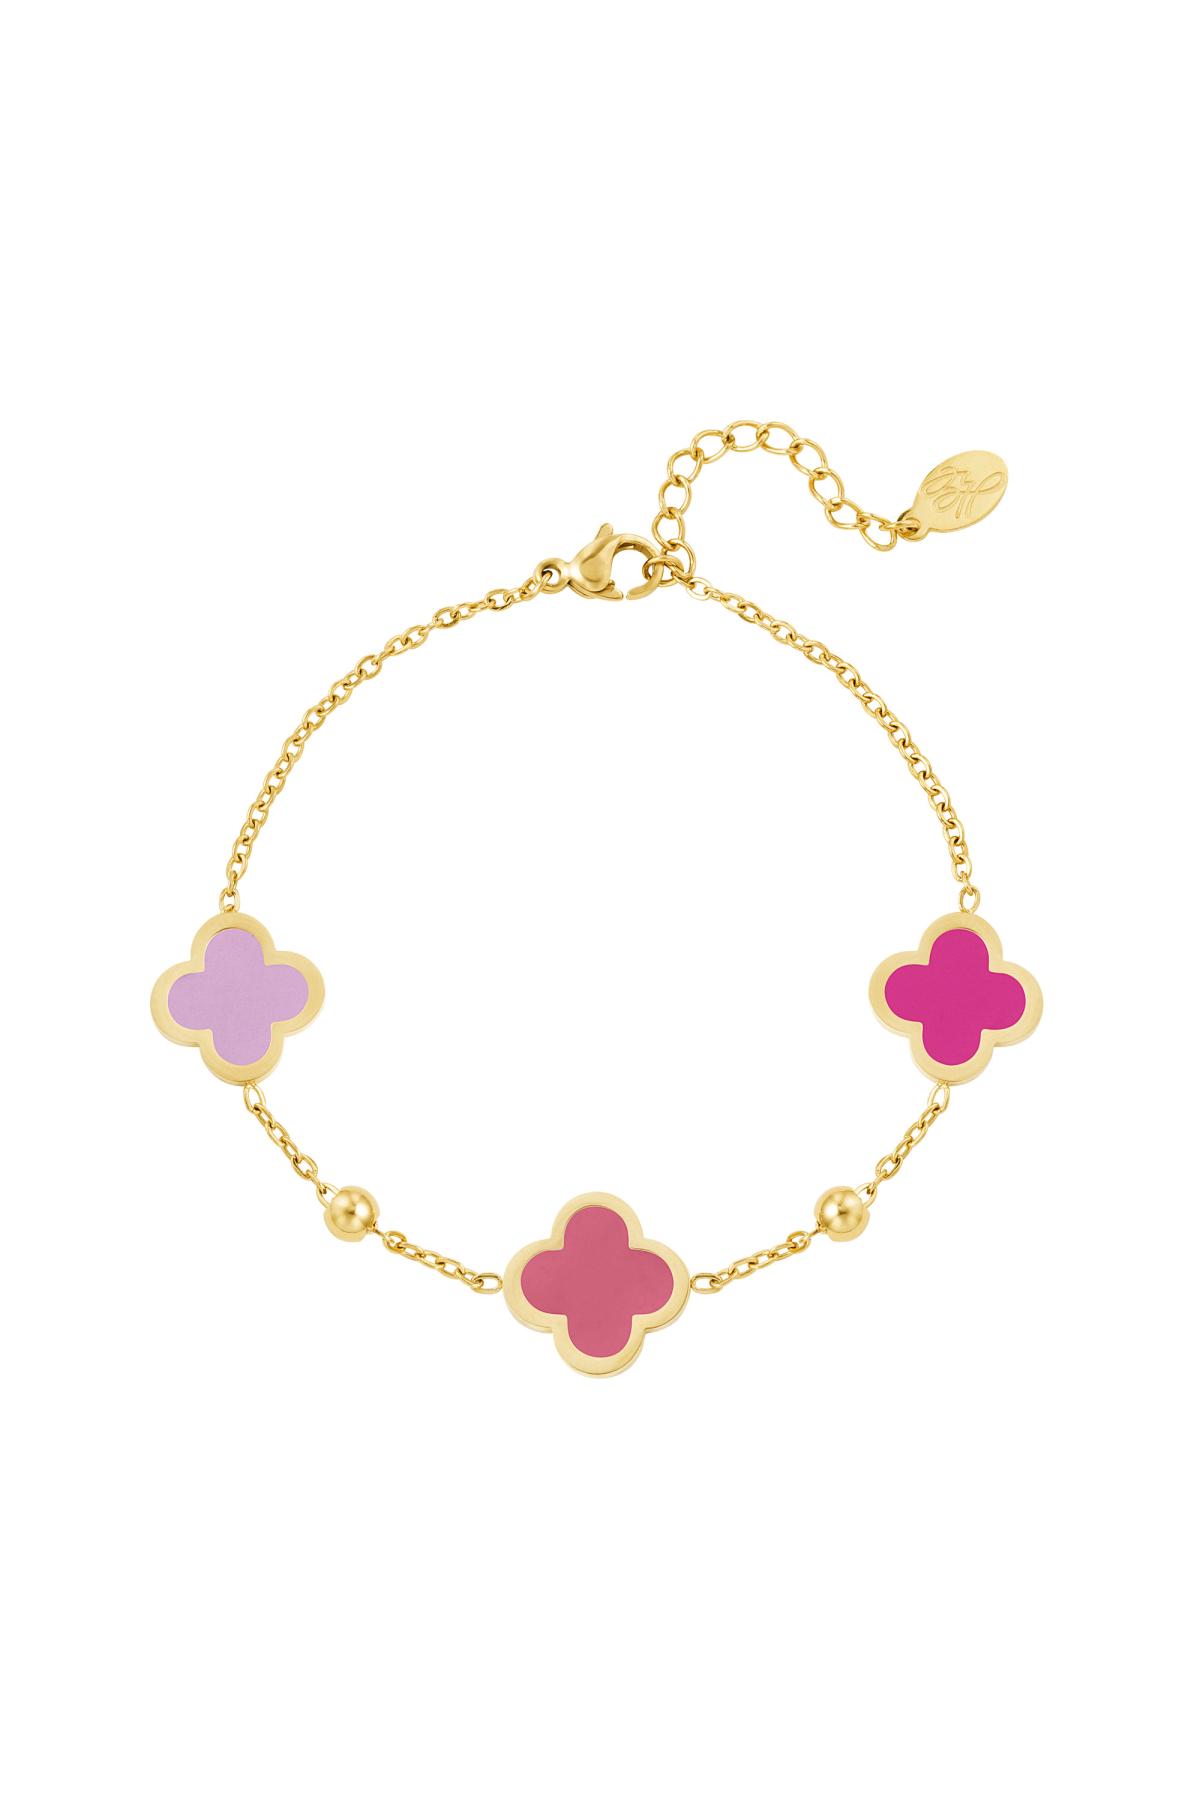 Bracelet three clovers Pink & Gold Stainless Steel 